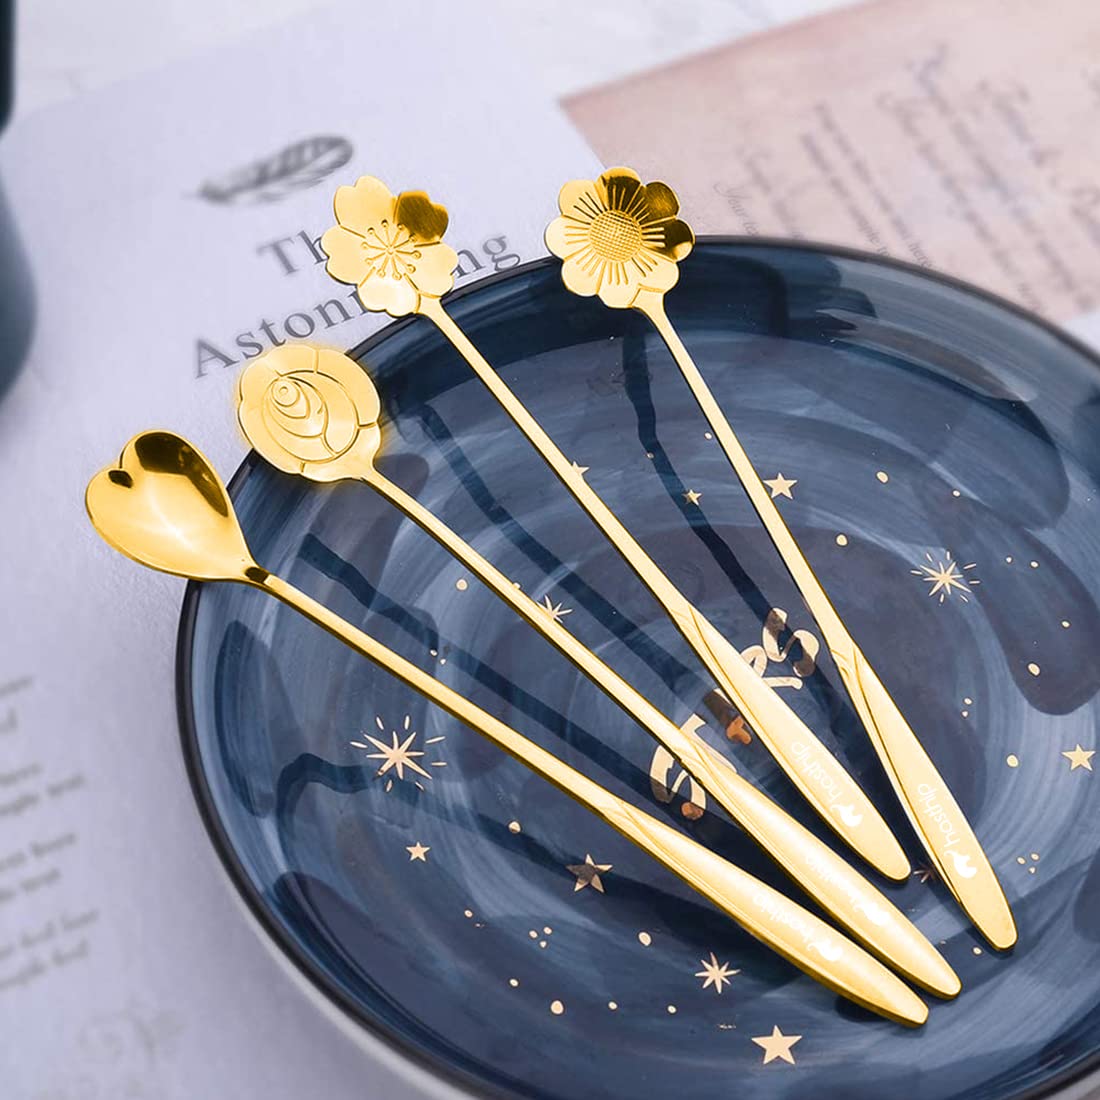 HASTHIP? Golden Spoon Set/Coffee Spoon/Dessert Spoon/Cutlery Kitchen Tableware/Stainless Steel Gold Flower Shape Coffee Spoon with Package Bag, 18cm, 4 Pcs Different Coffee Spoon